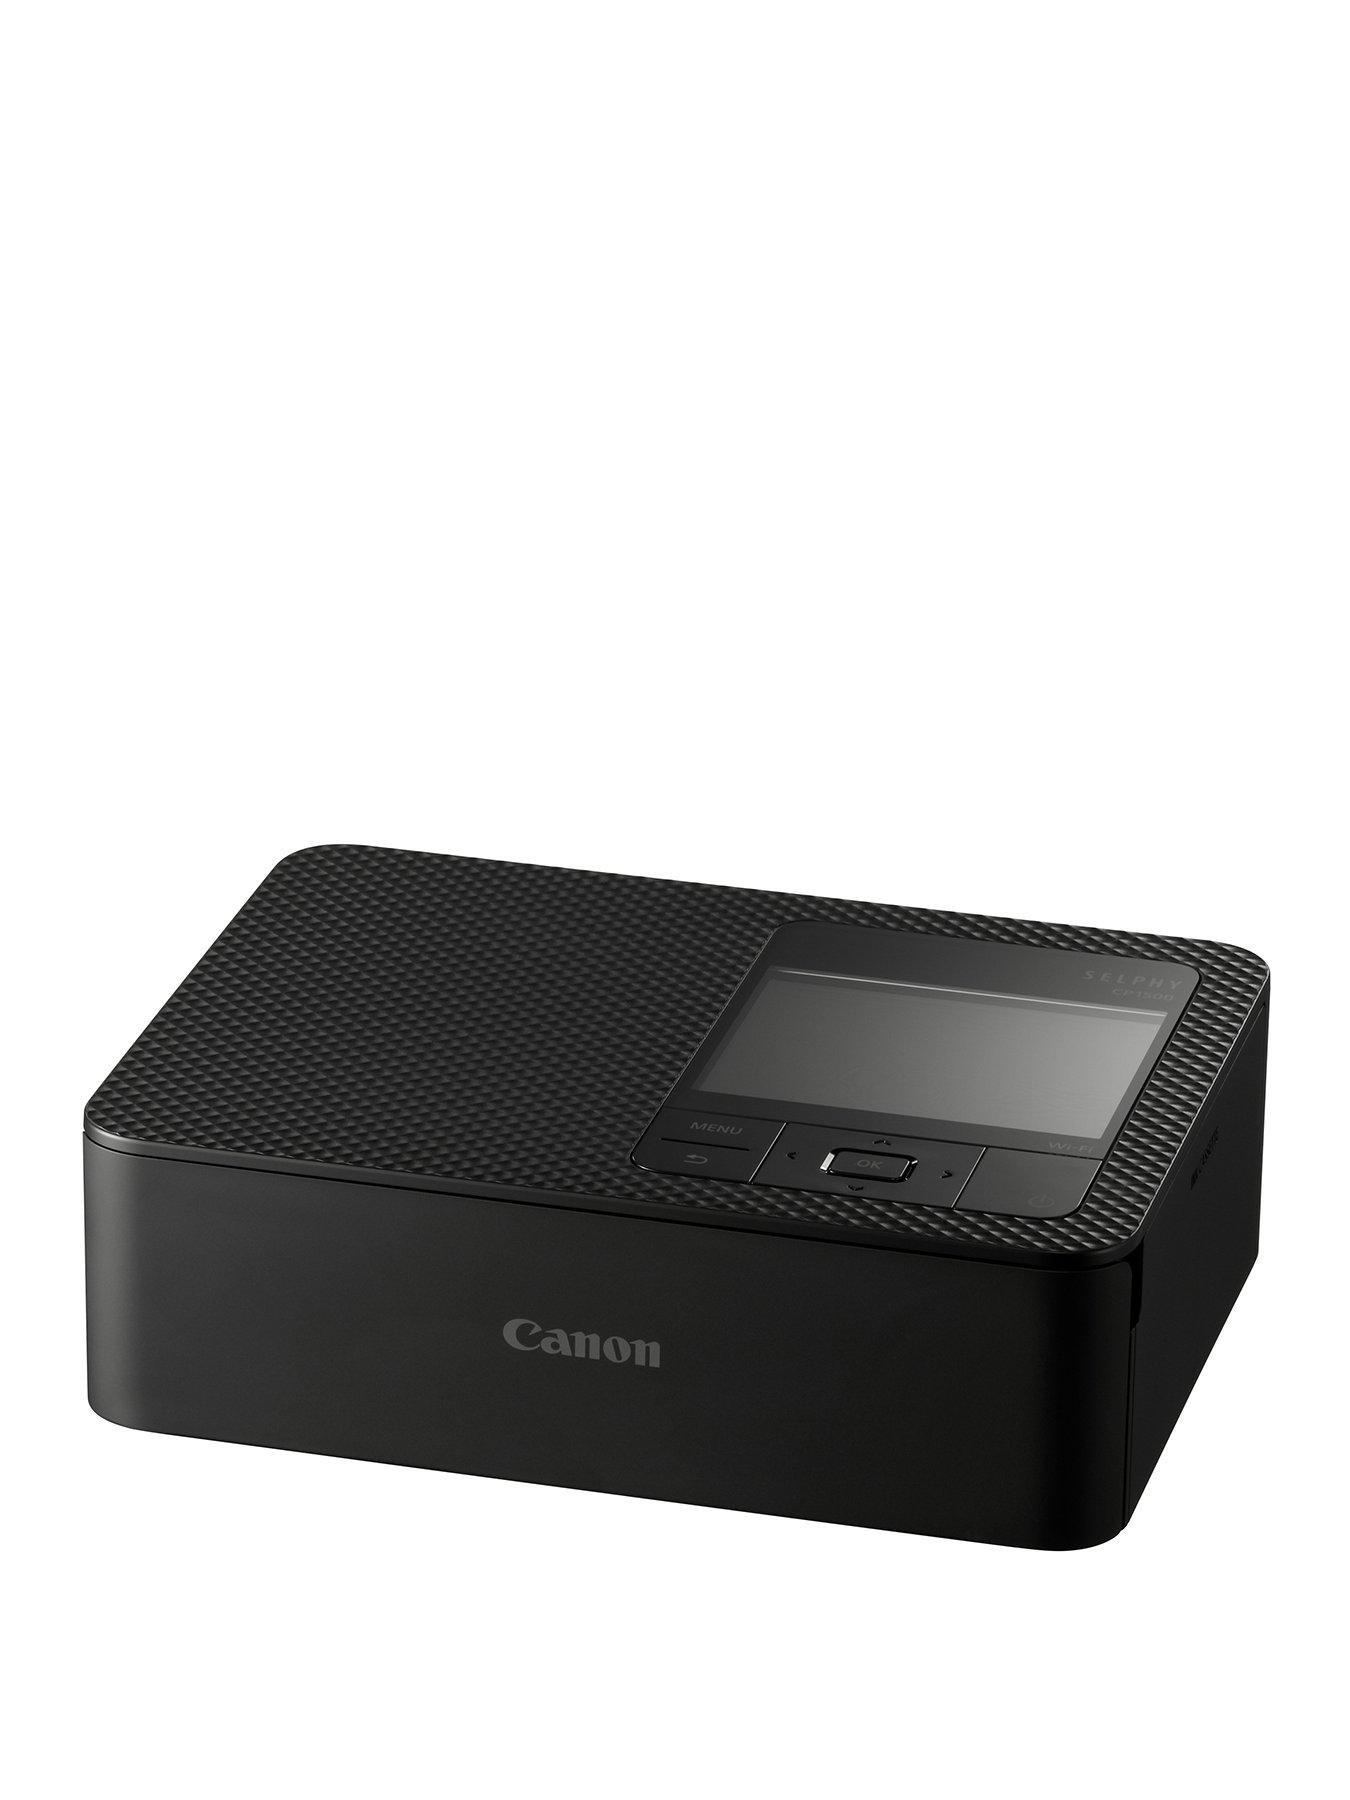 Canon SELPHY CP1500 Compact Photo Printer review - The Gadgeteer